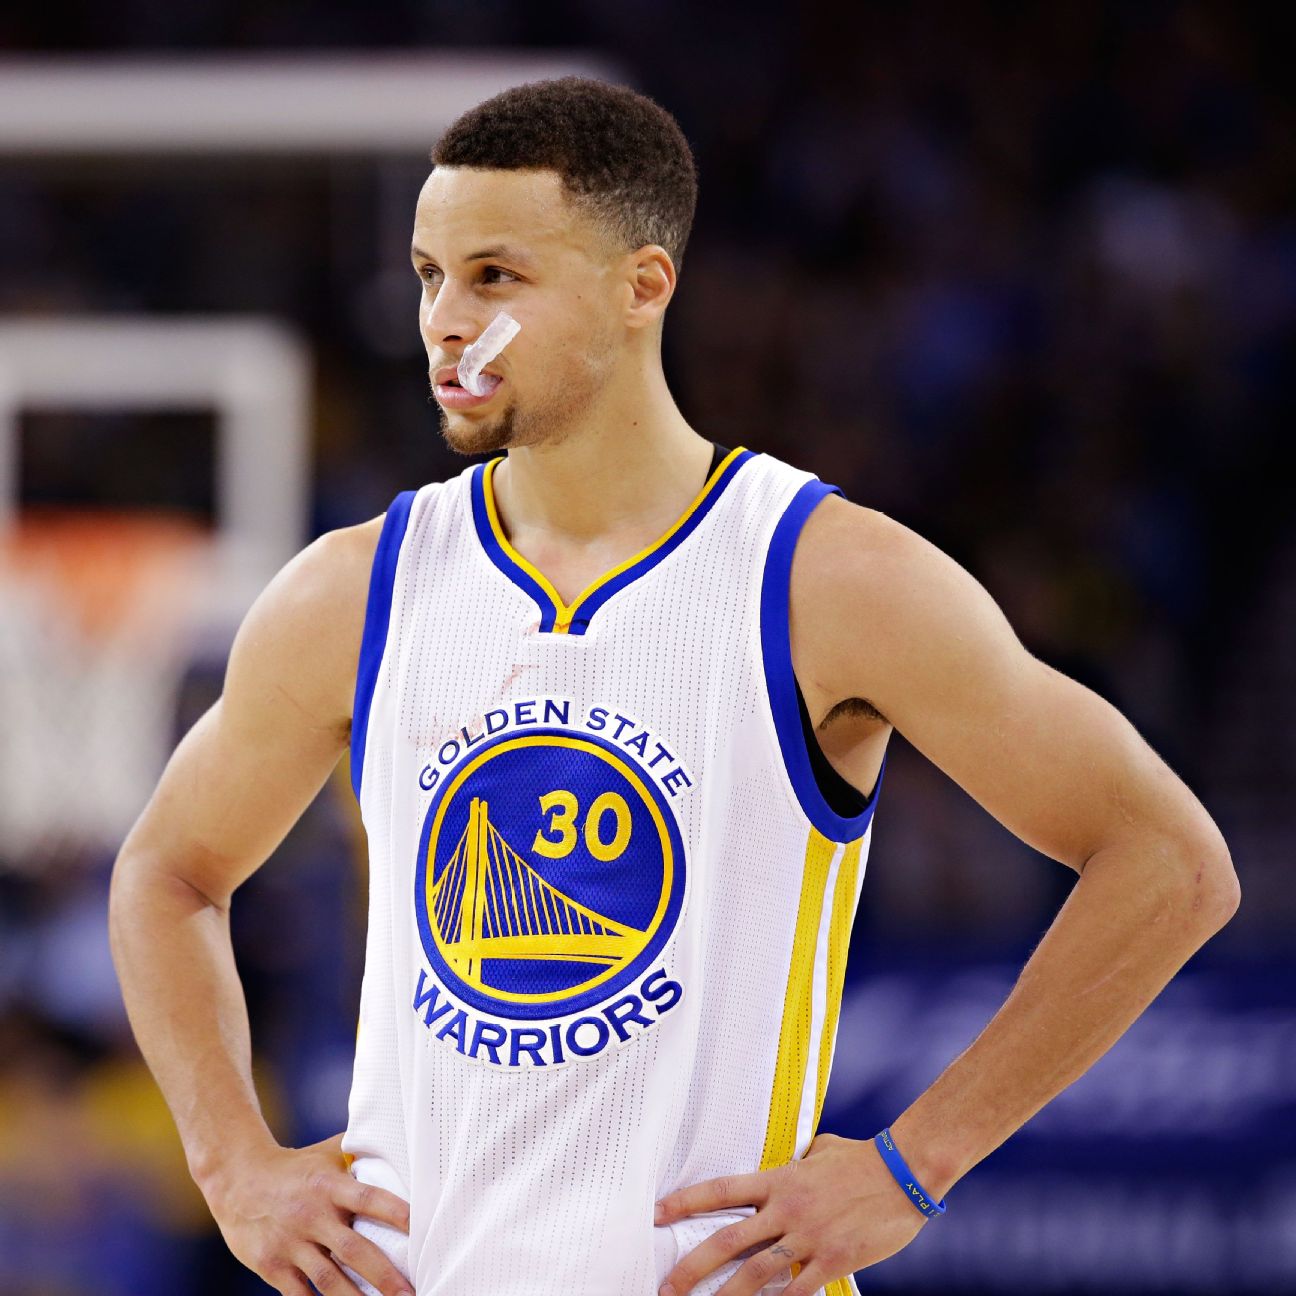 Mouthguard used by Stephen Curry of Golden State Warriors sells for $ 